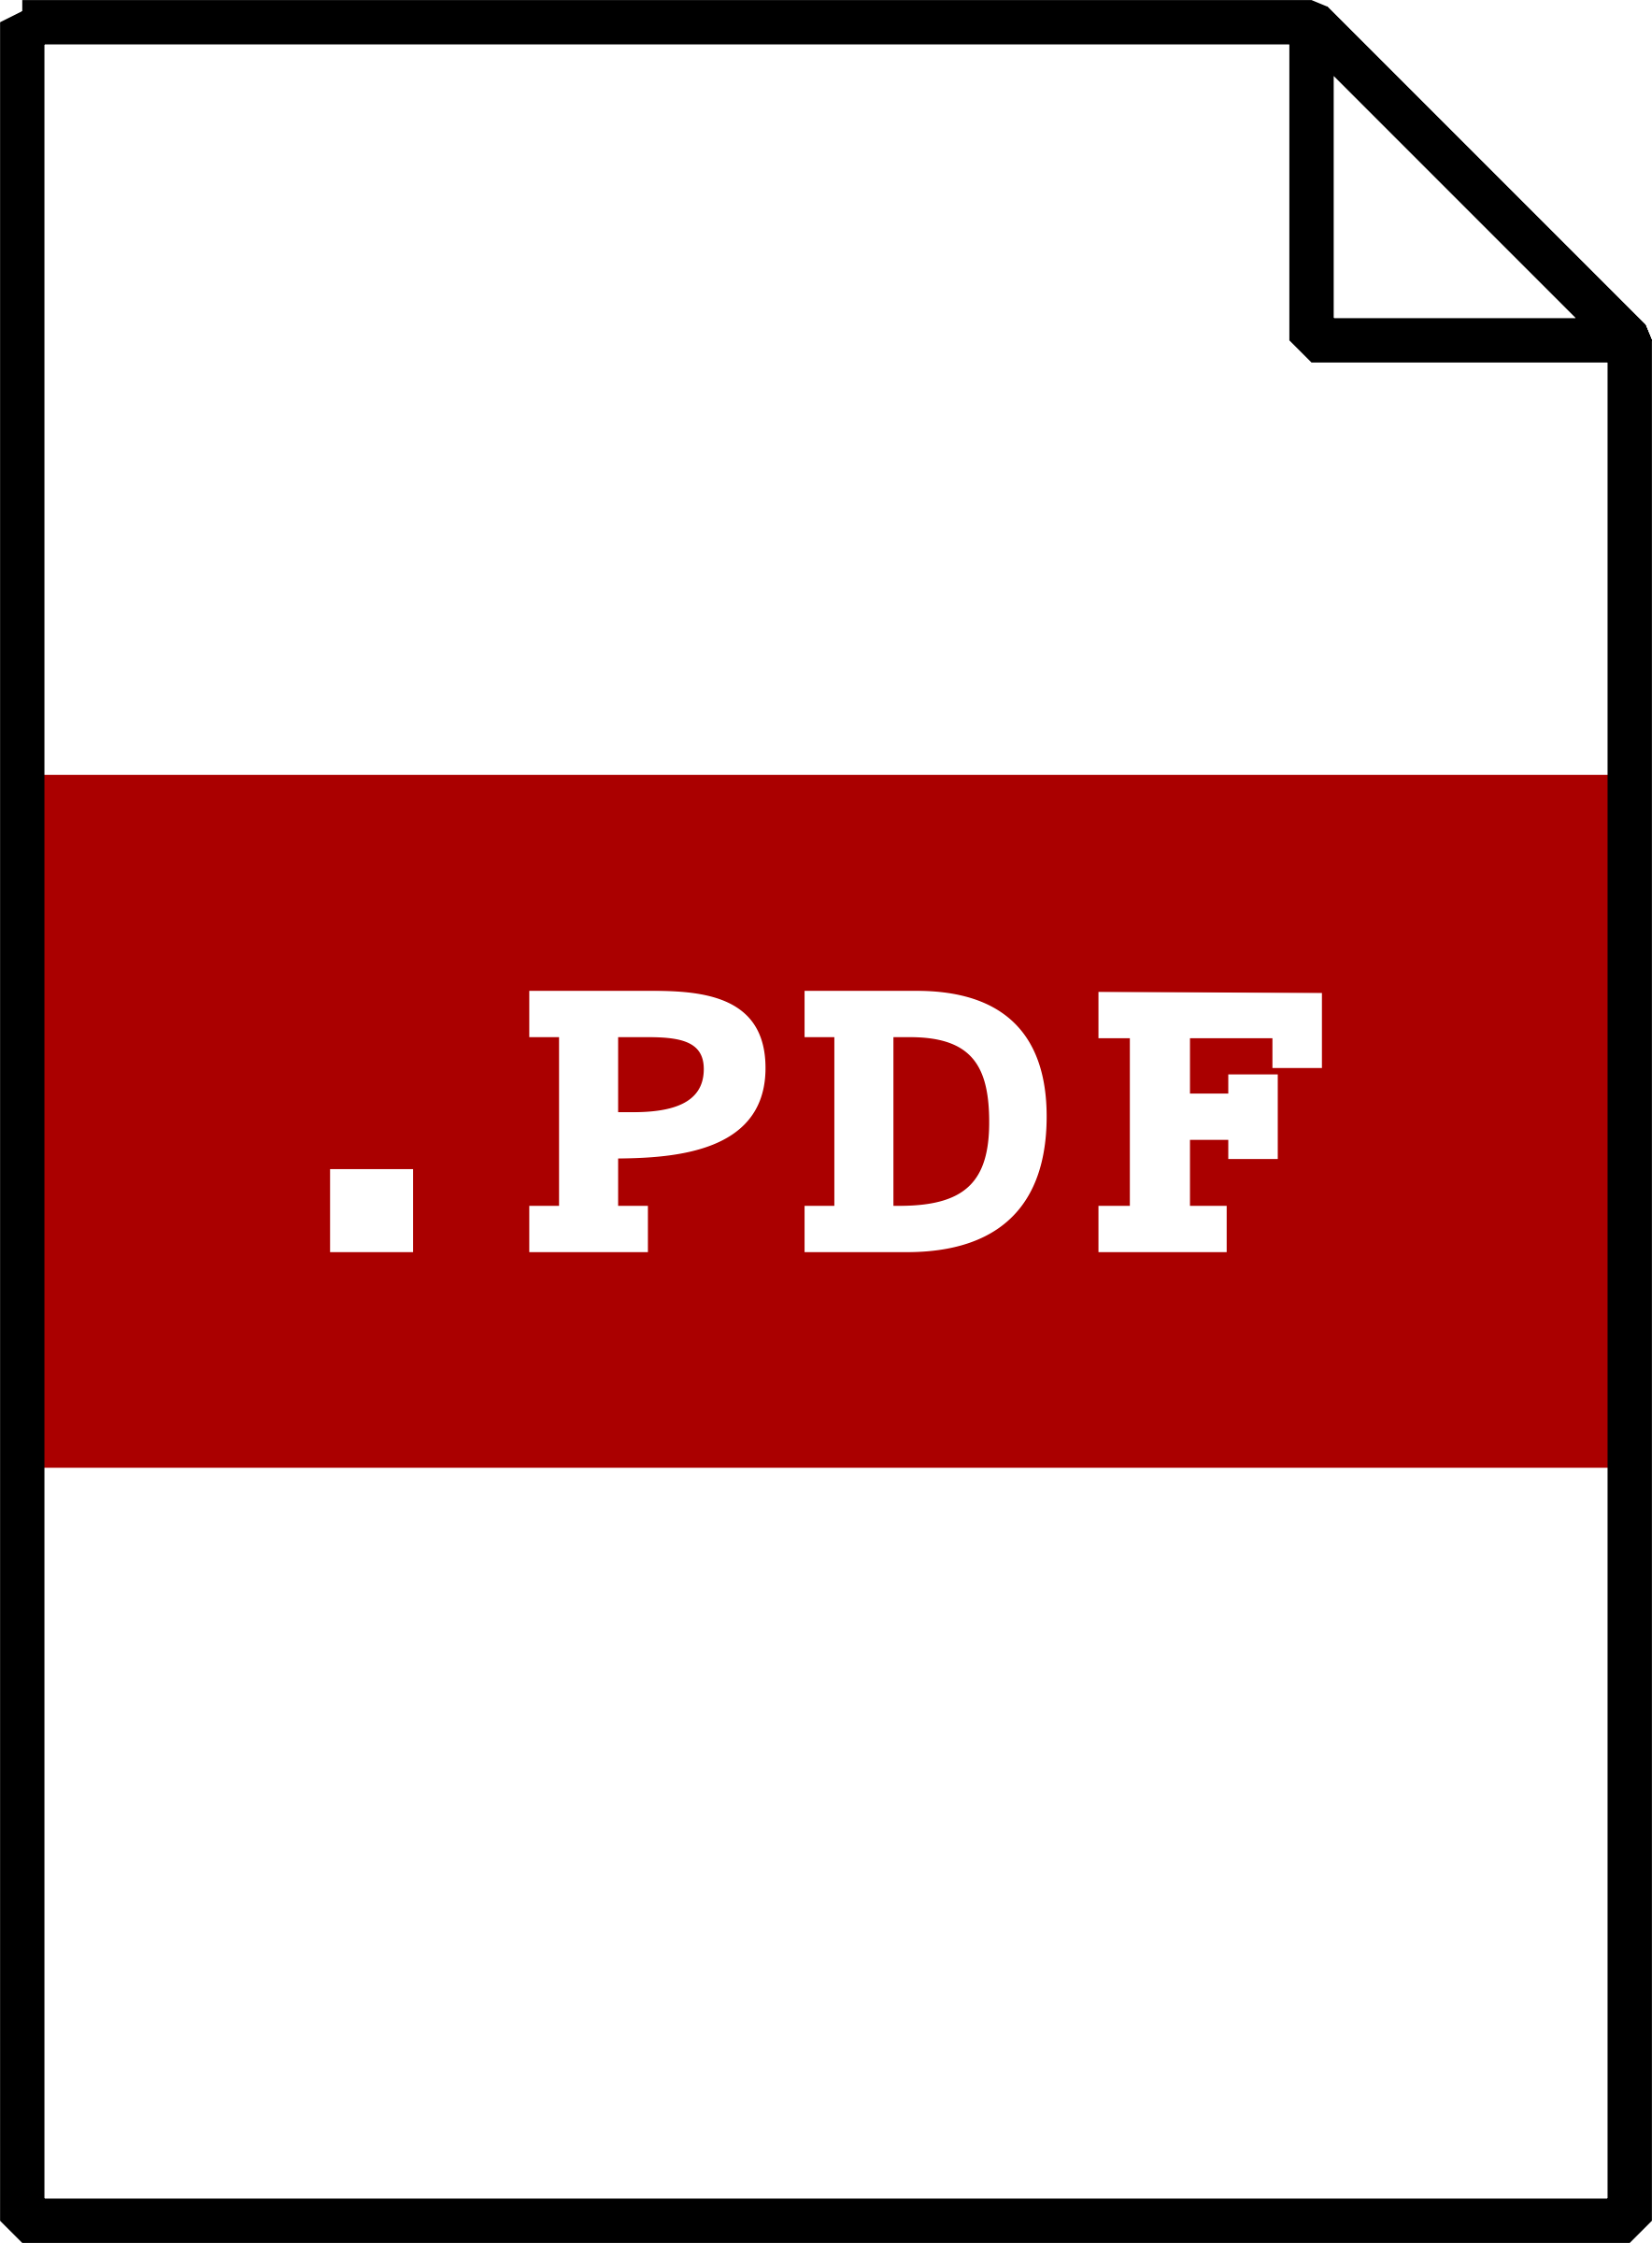 Modified pdf free download for windows 7